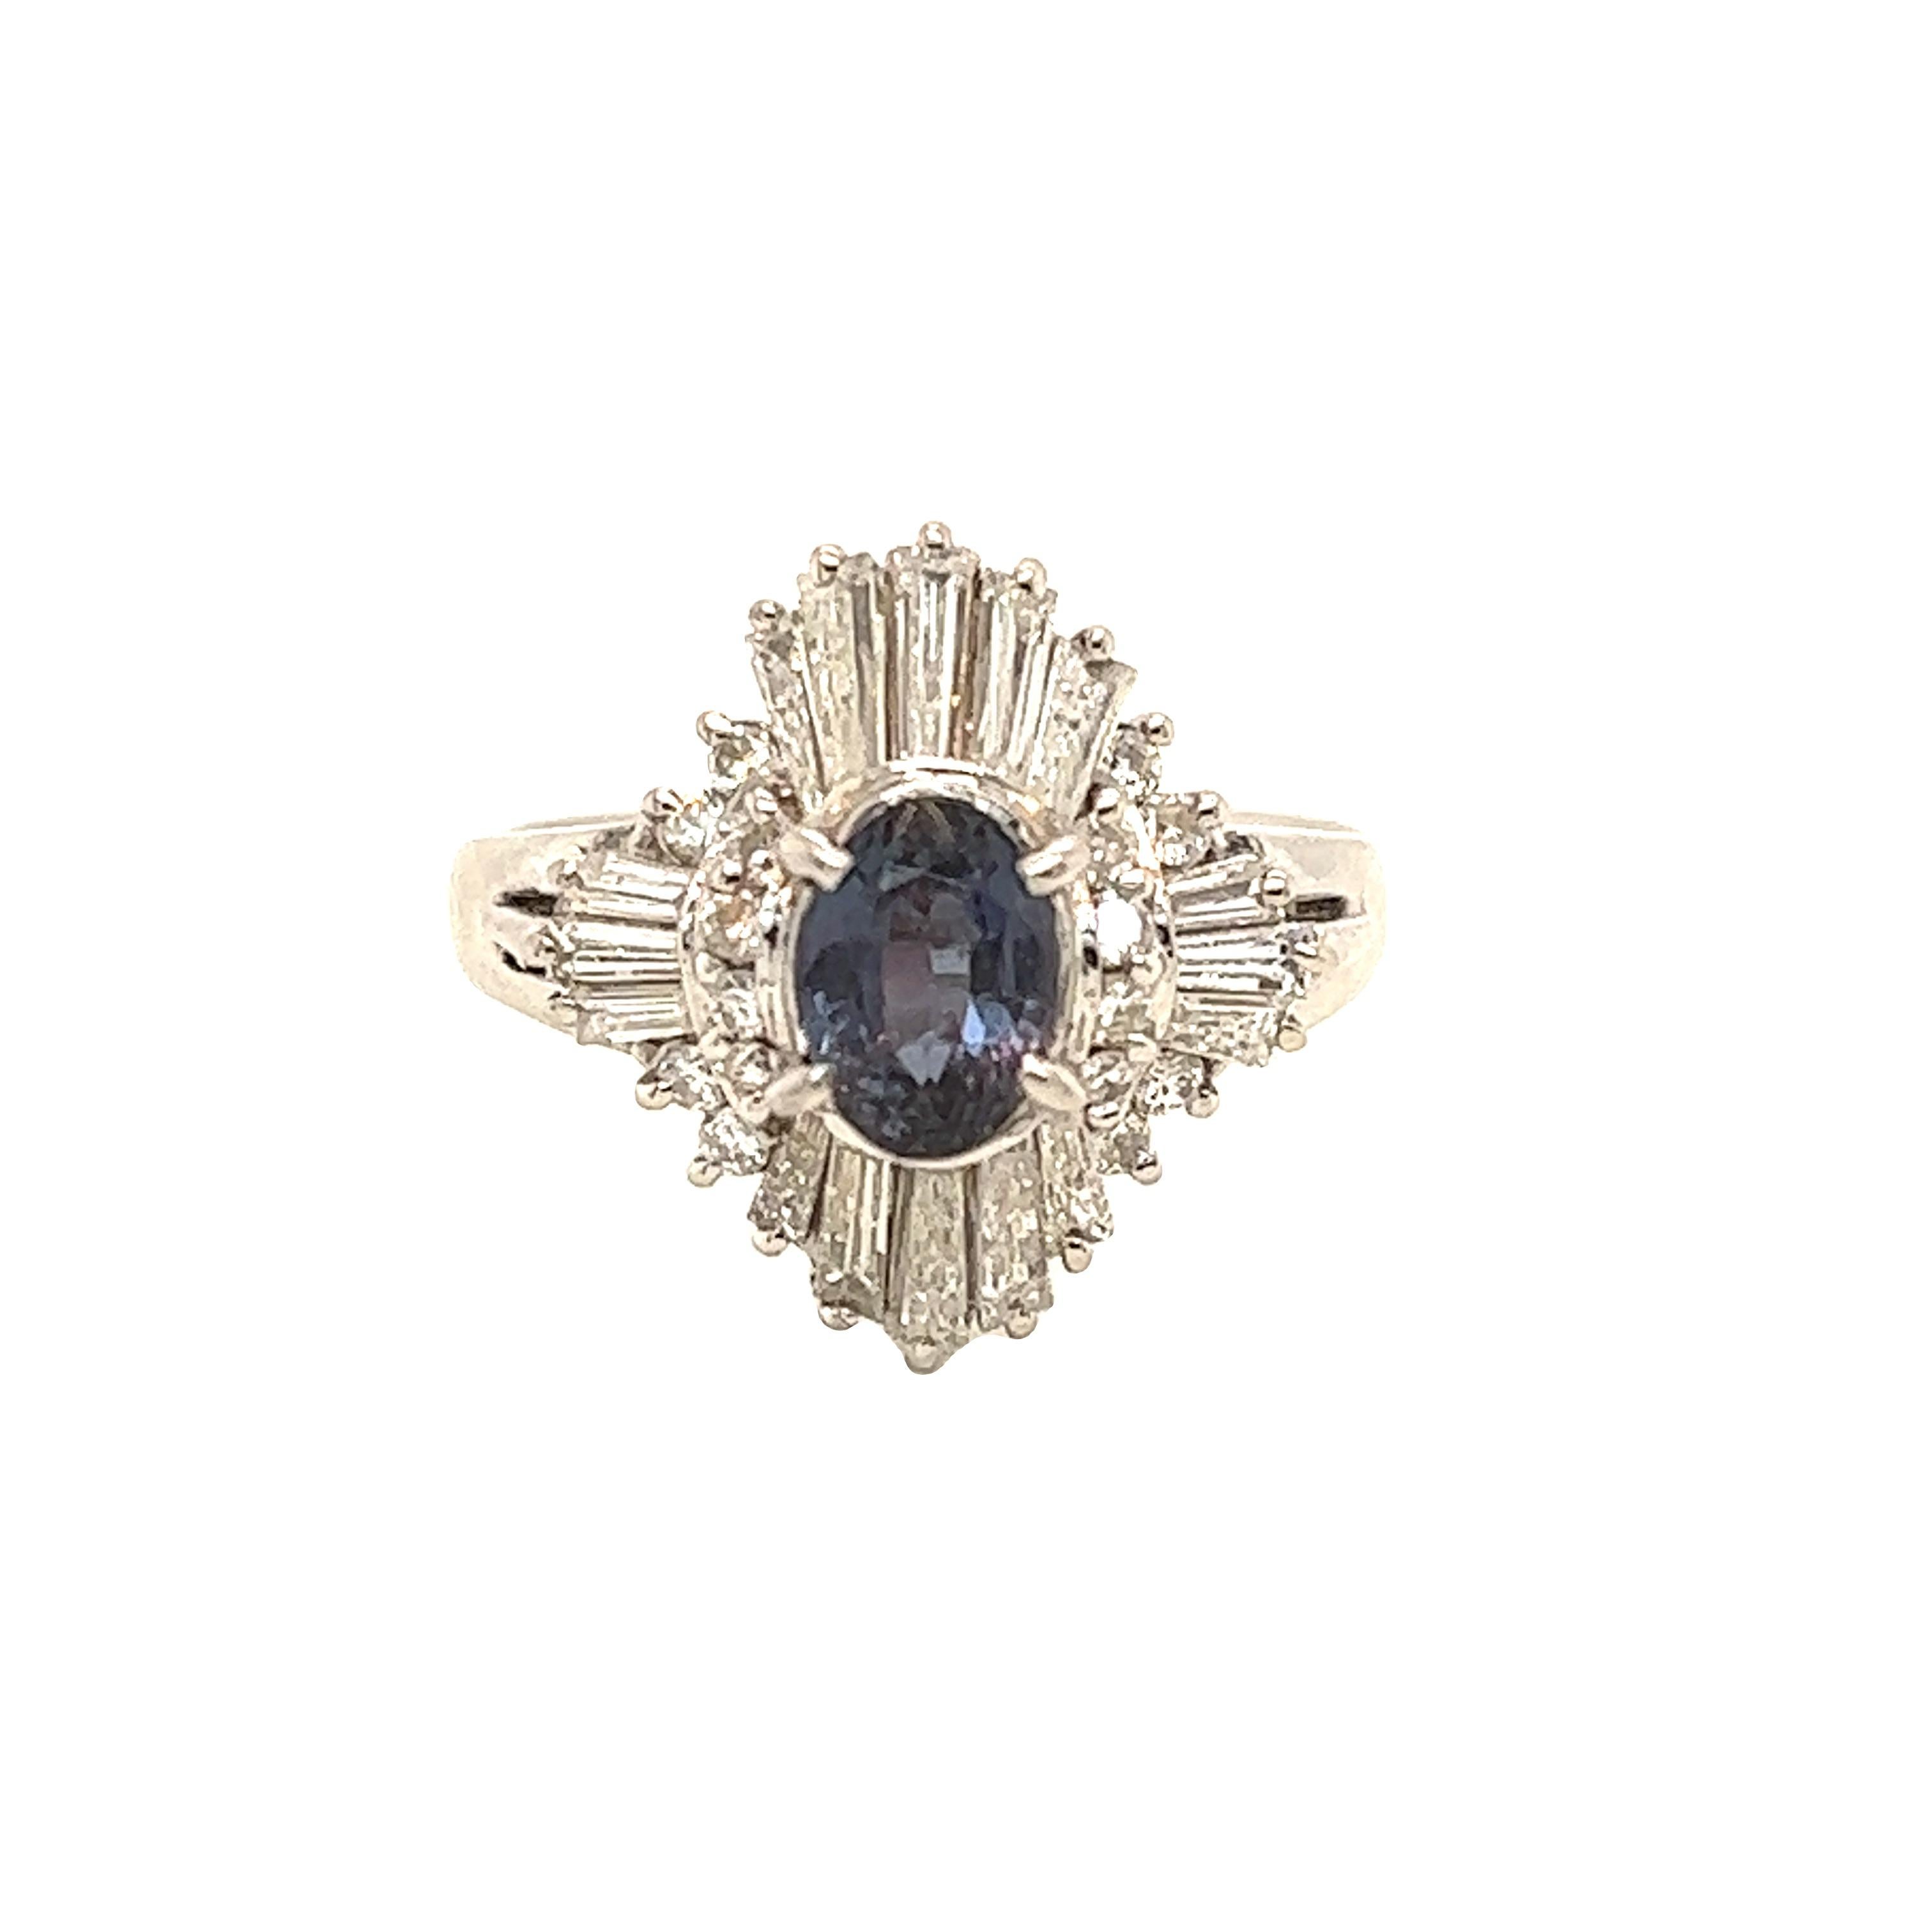 This is a gorgeous natural AAA quality oval Alexandrite surrounded by dainty diamonds that is set in a vintage Platinum setting. This ring features a natural 0.86 carat oval alexandrite that is certified by the Gemological Institute of America (GIA)